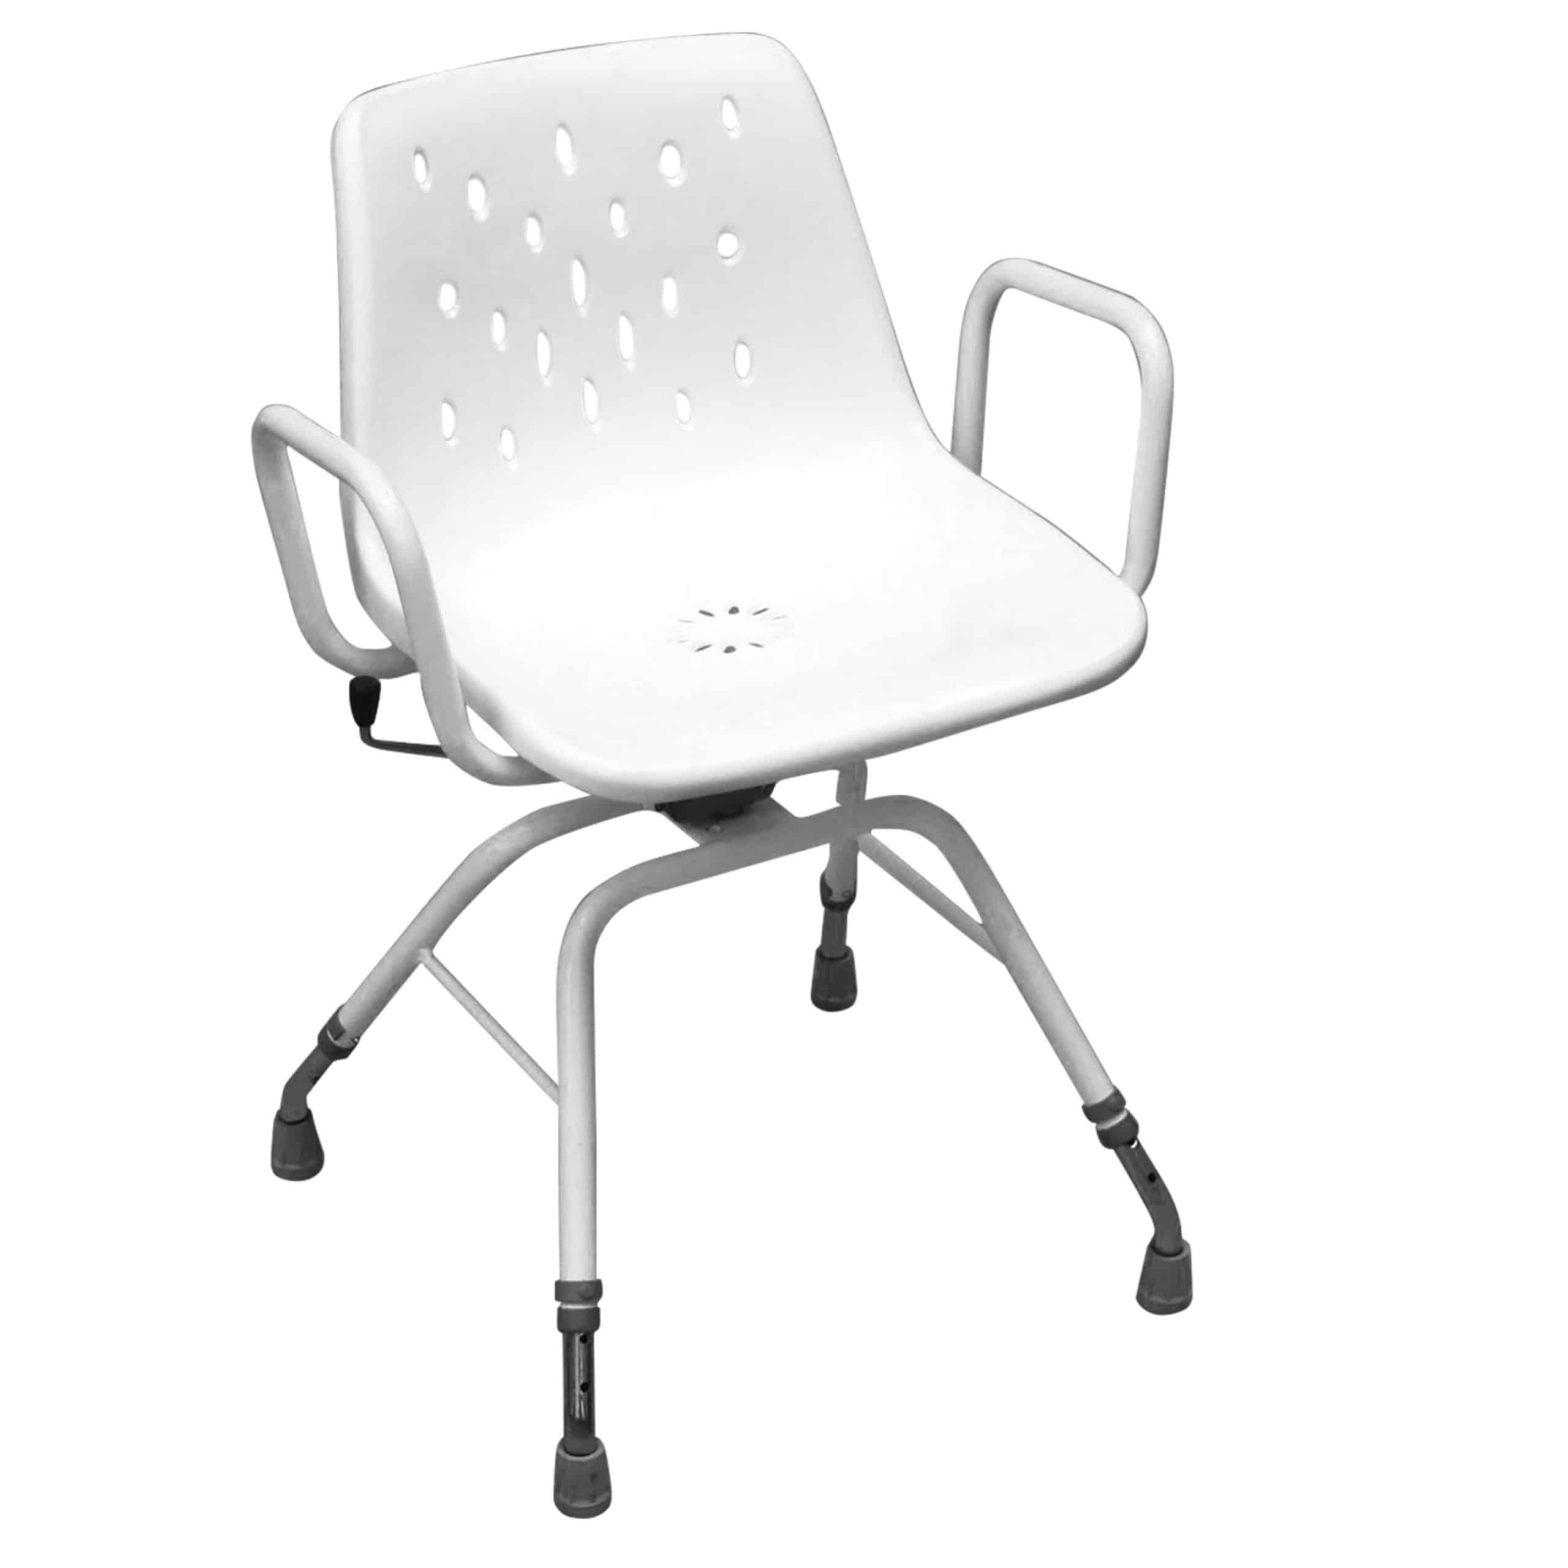 Care Quip Ultra Swivel Shower Chair